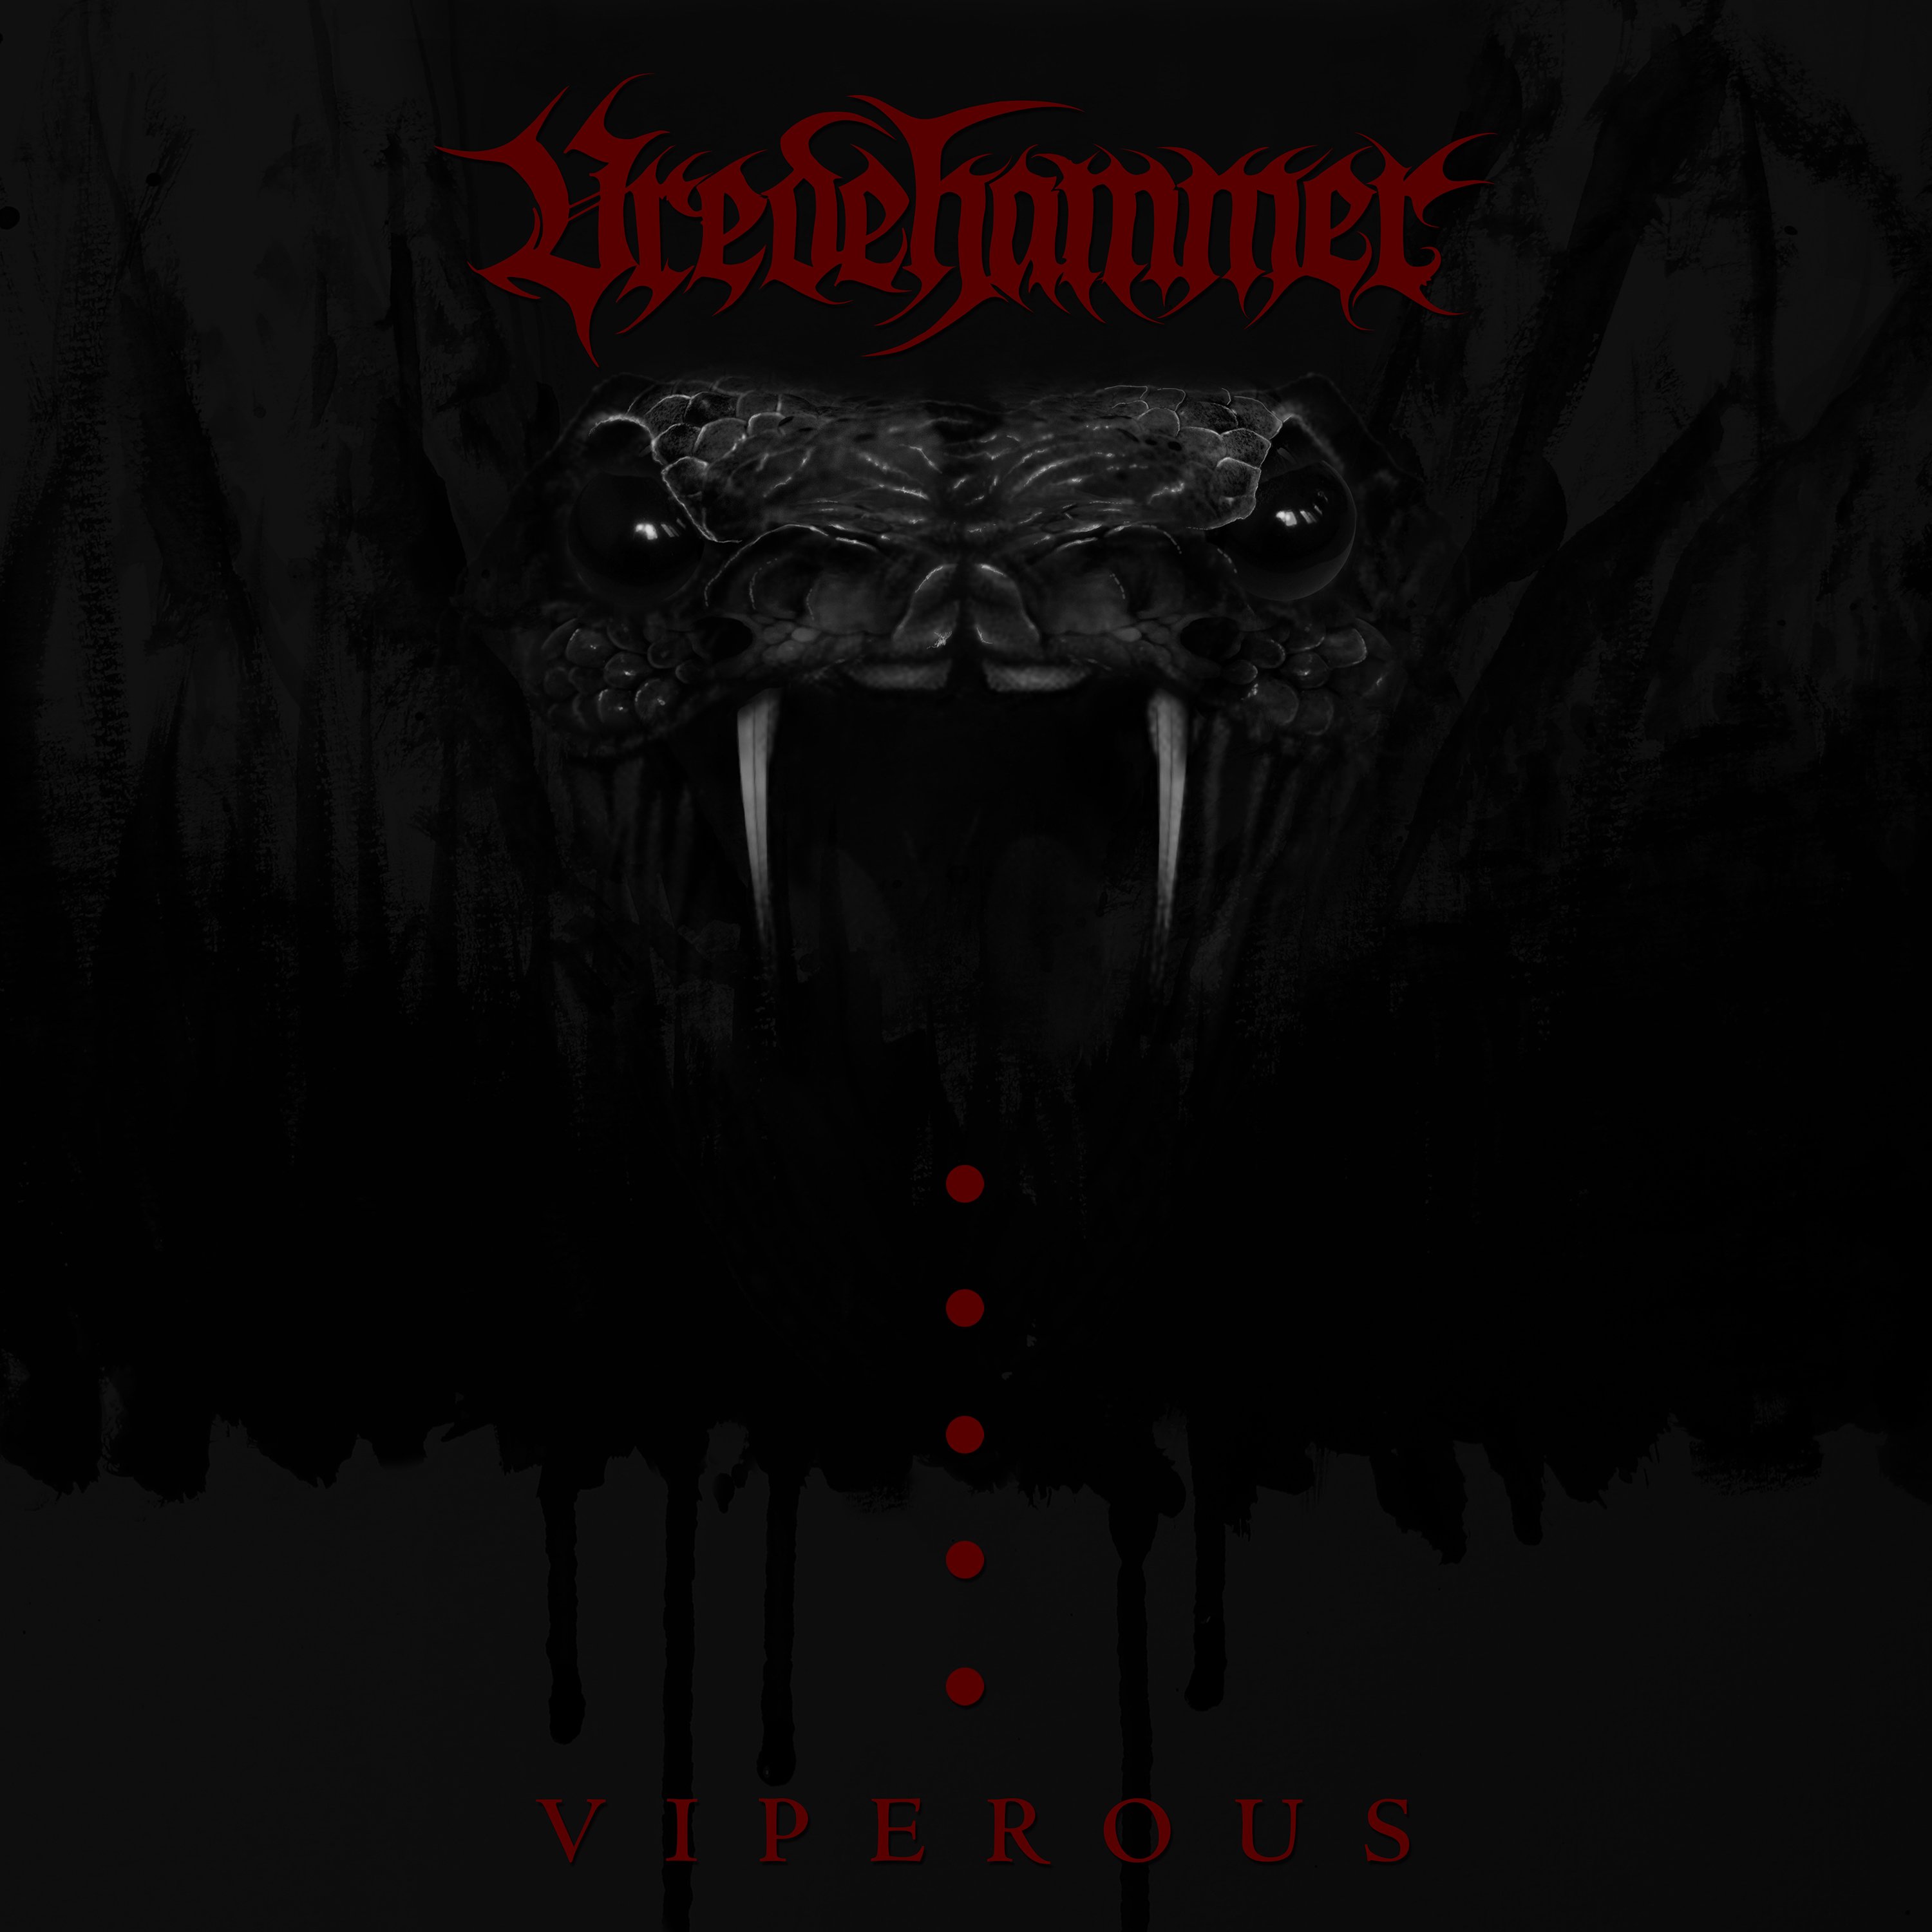 Vredehammer - Viperous (2020) 24bit FLAC Download